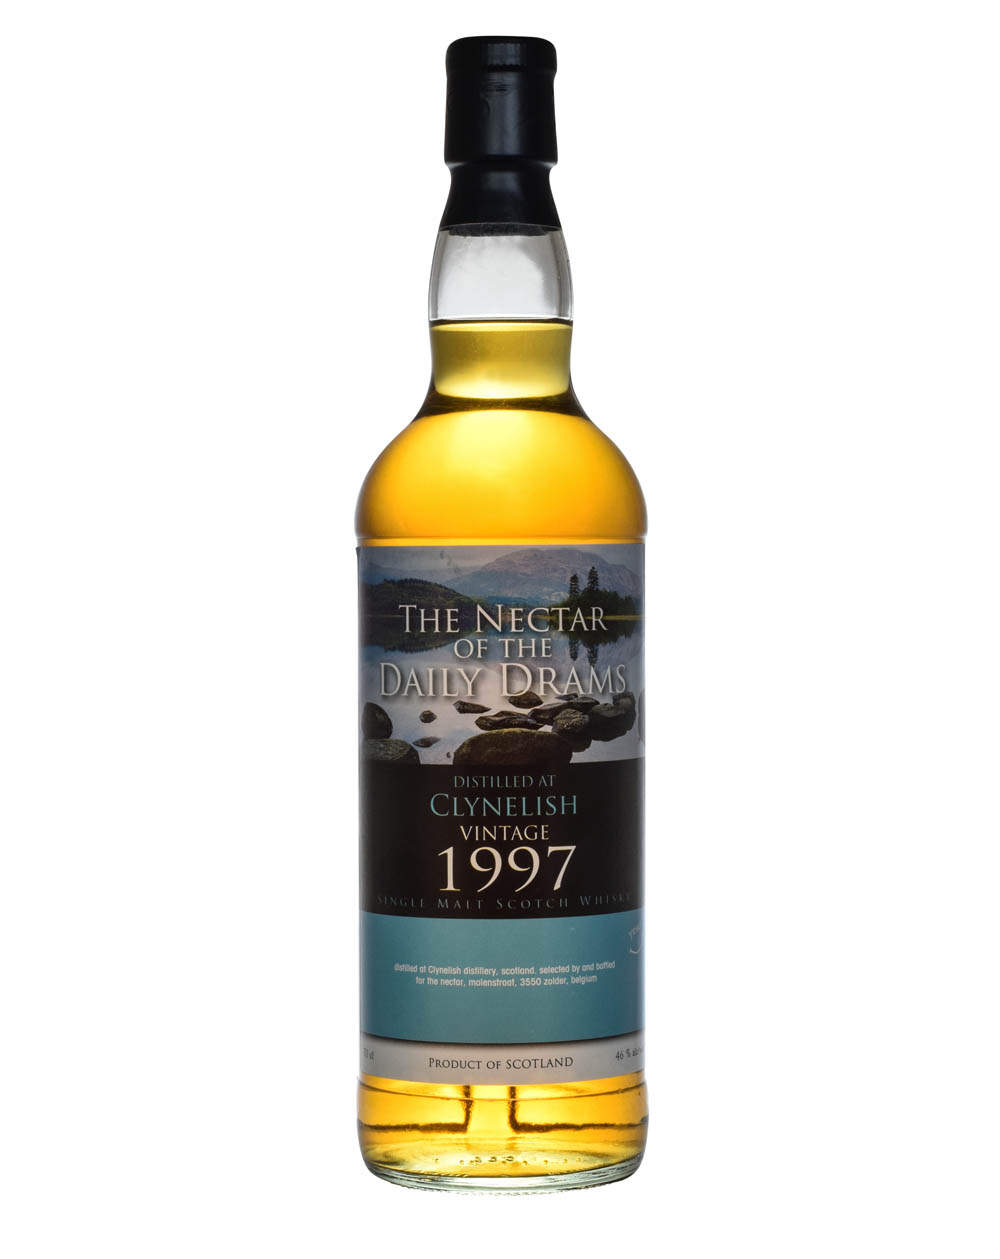 Clynelish 1997 Nectar of the Daily Drams Musthave Malts MHM